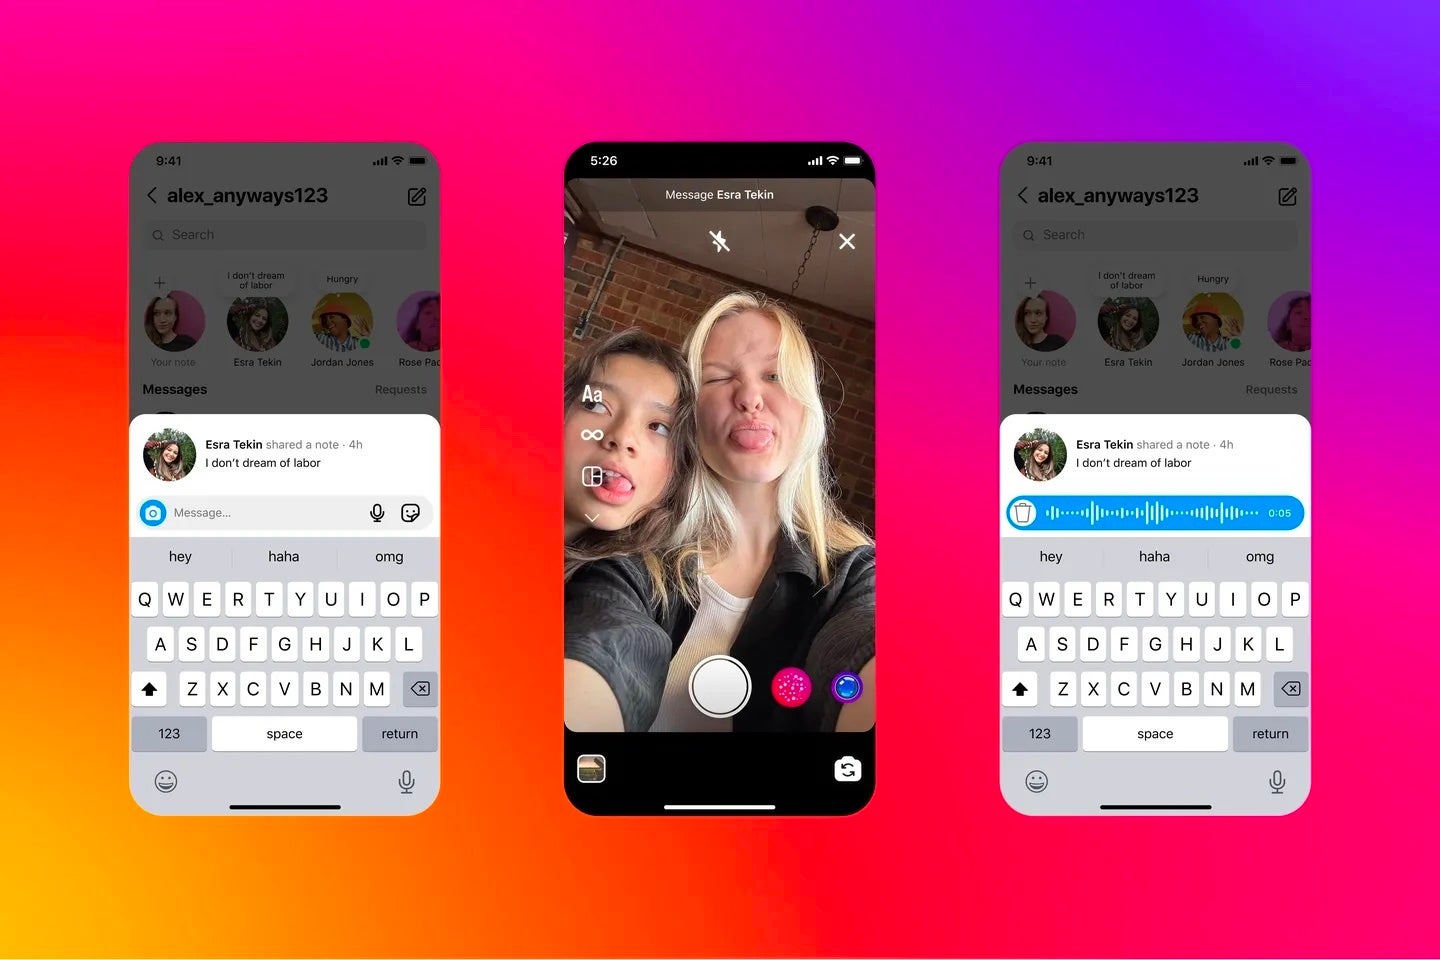 You can now set your Instagram status as a selfie video and reply to notes with more than text